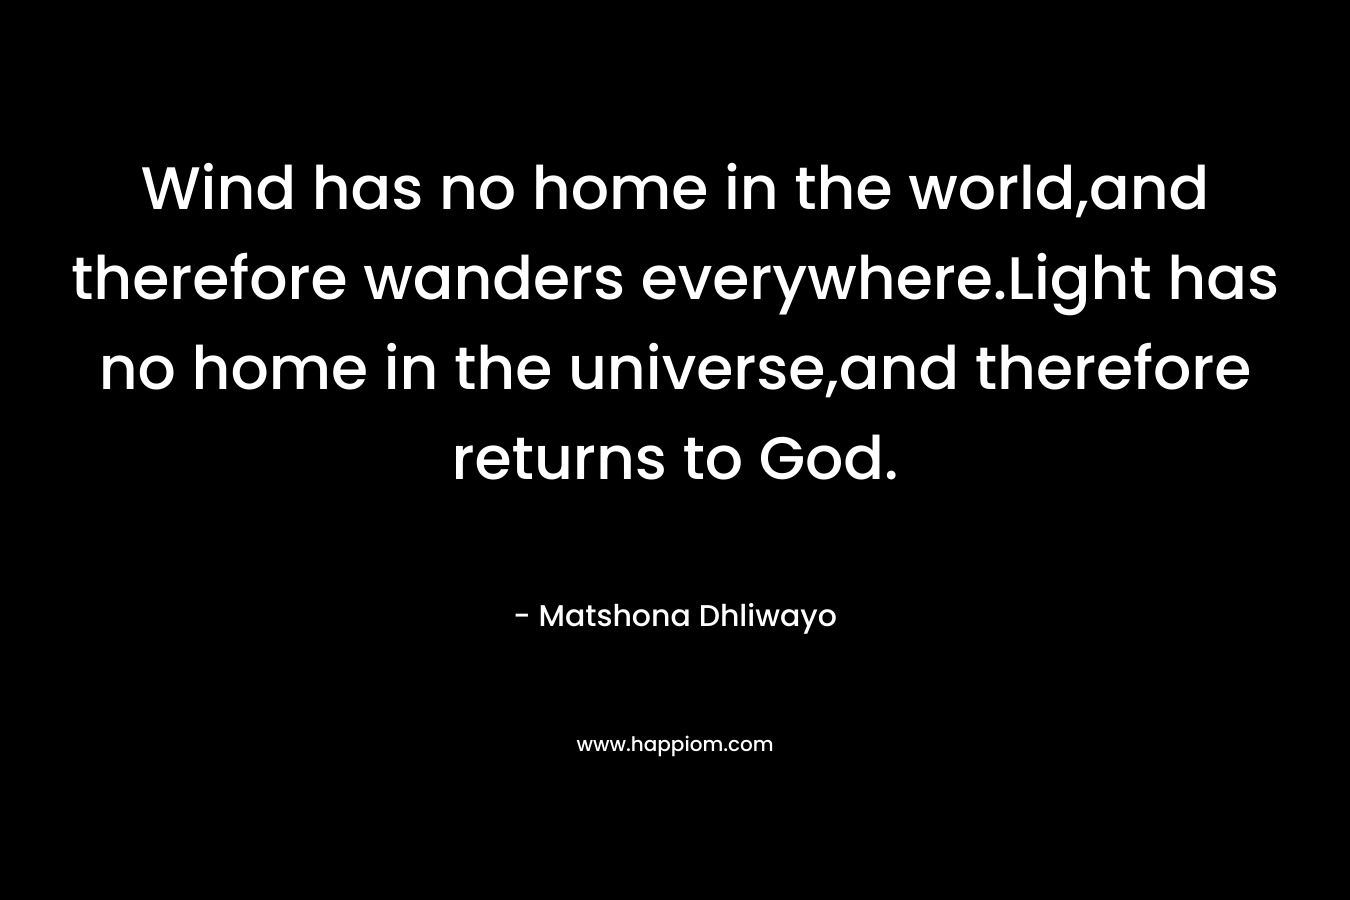 Wind has no home in the world,and therefore wanders everywhere.Light has no home in the universe,and therefore returns to God.